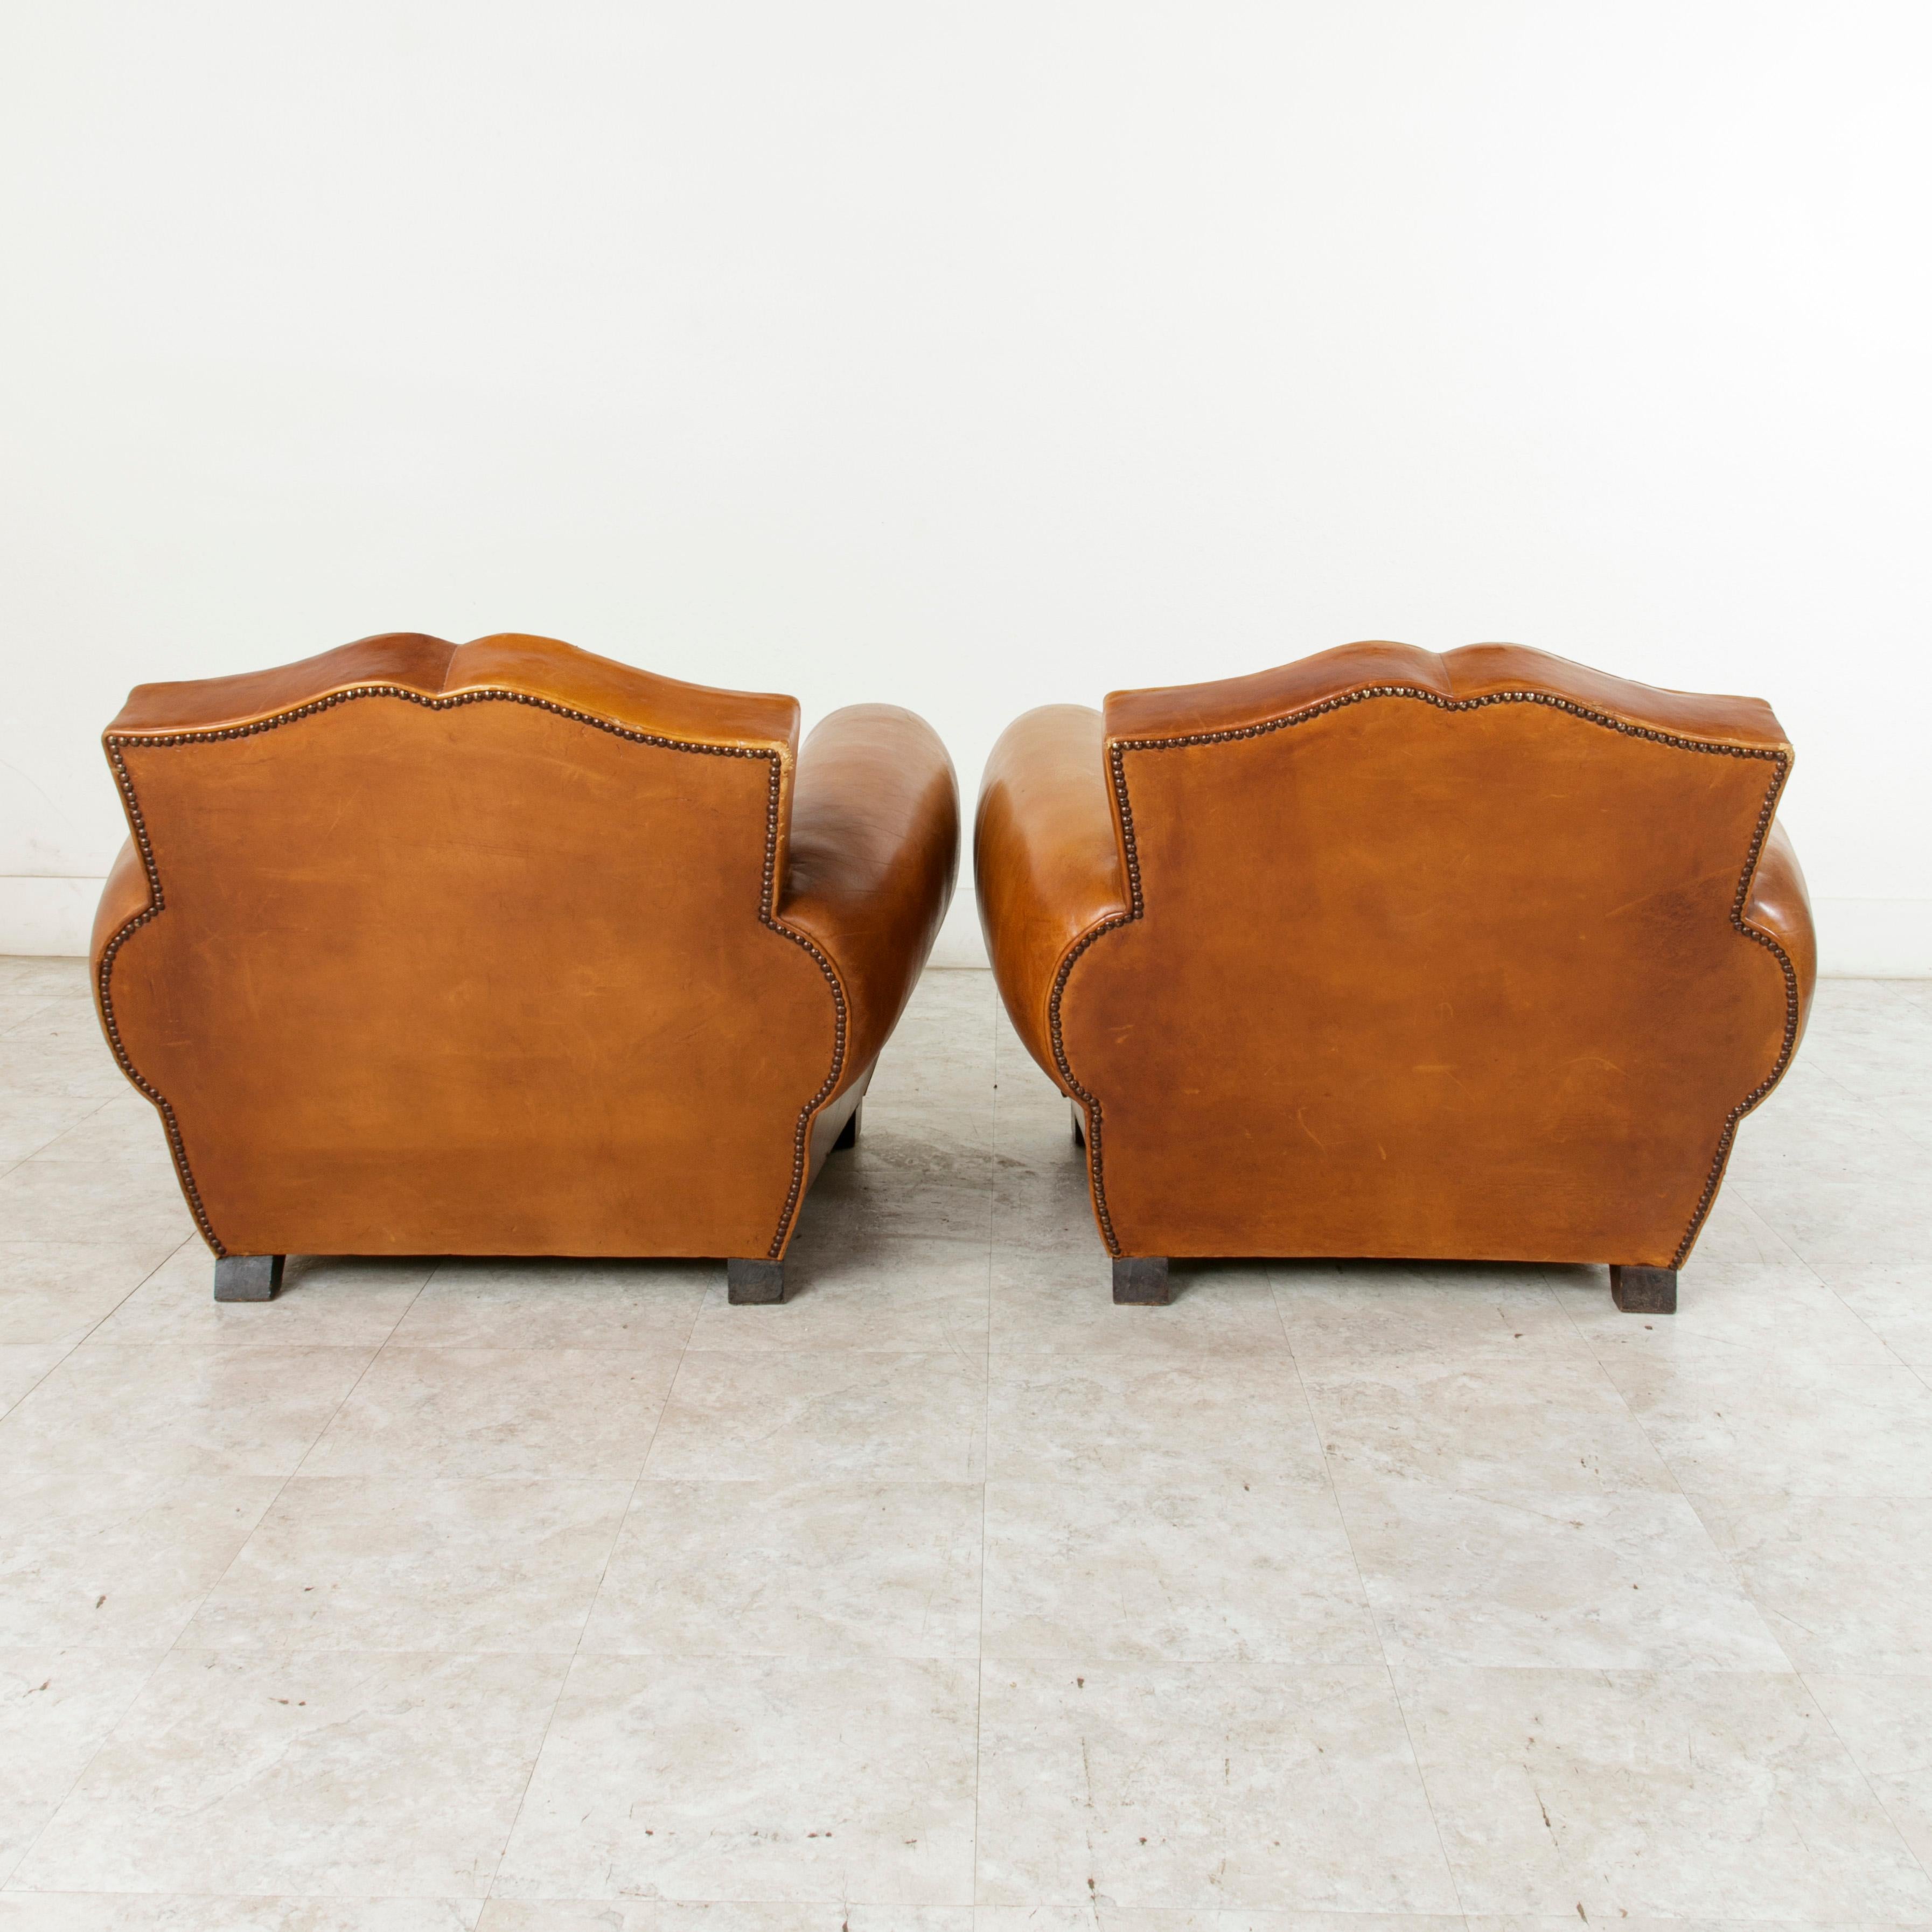 Pair of French Art Deco Leather Club Chairs, Moustache Back Club Chairs 1